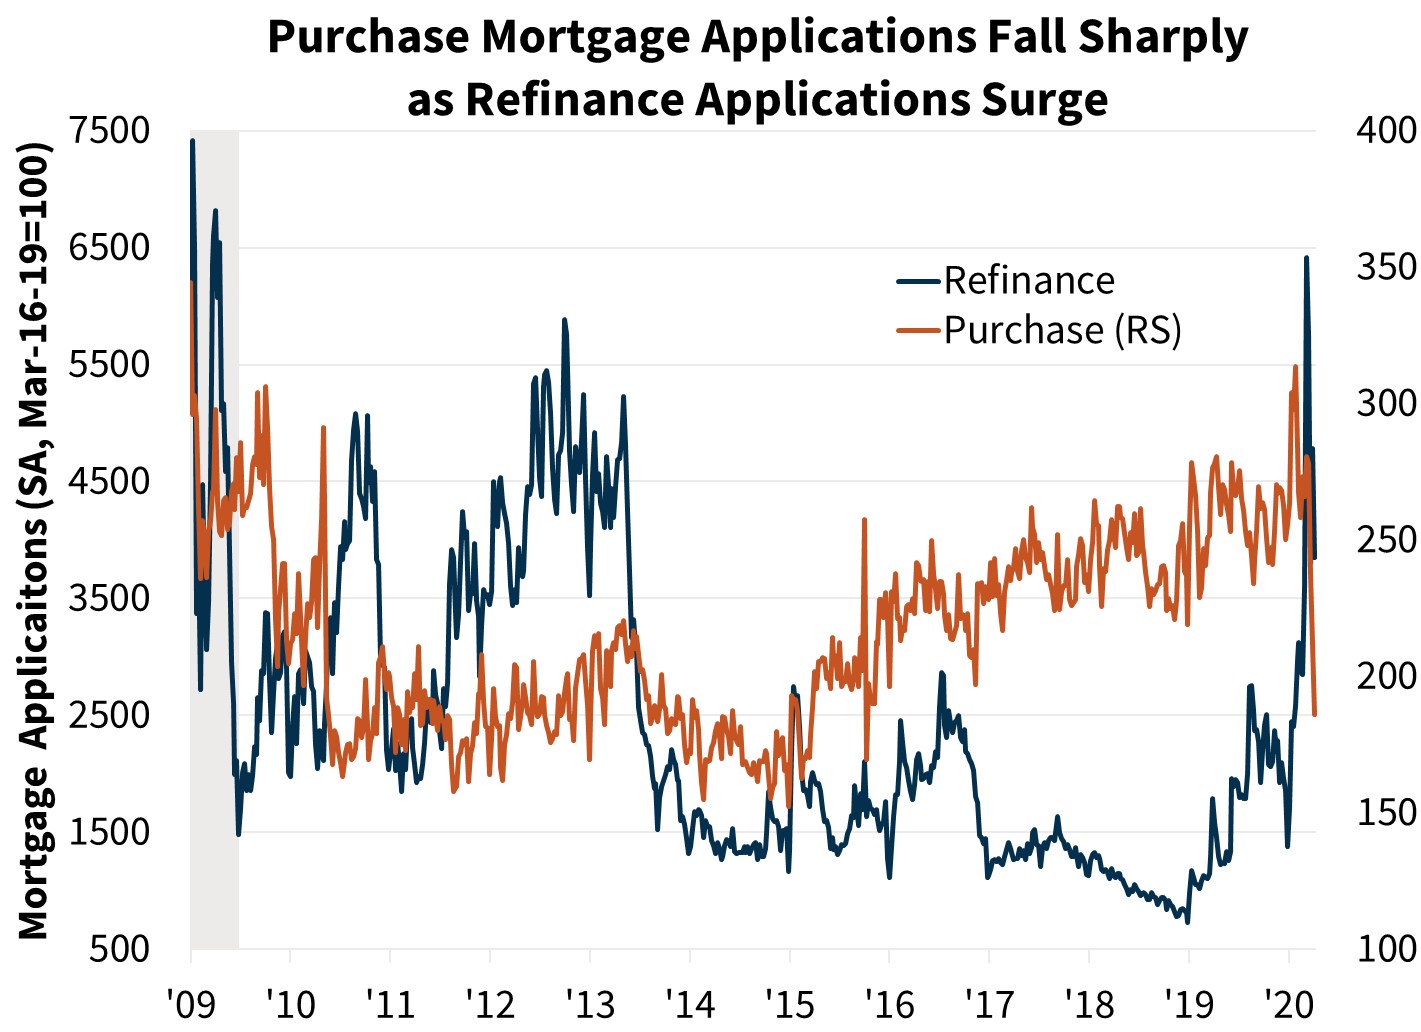  Purchase Mortgage Applications Fall Sharply as Refinance Applications Surge 